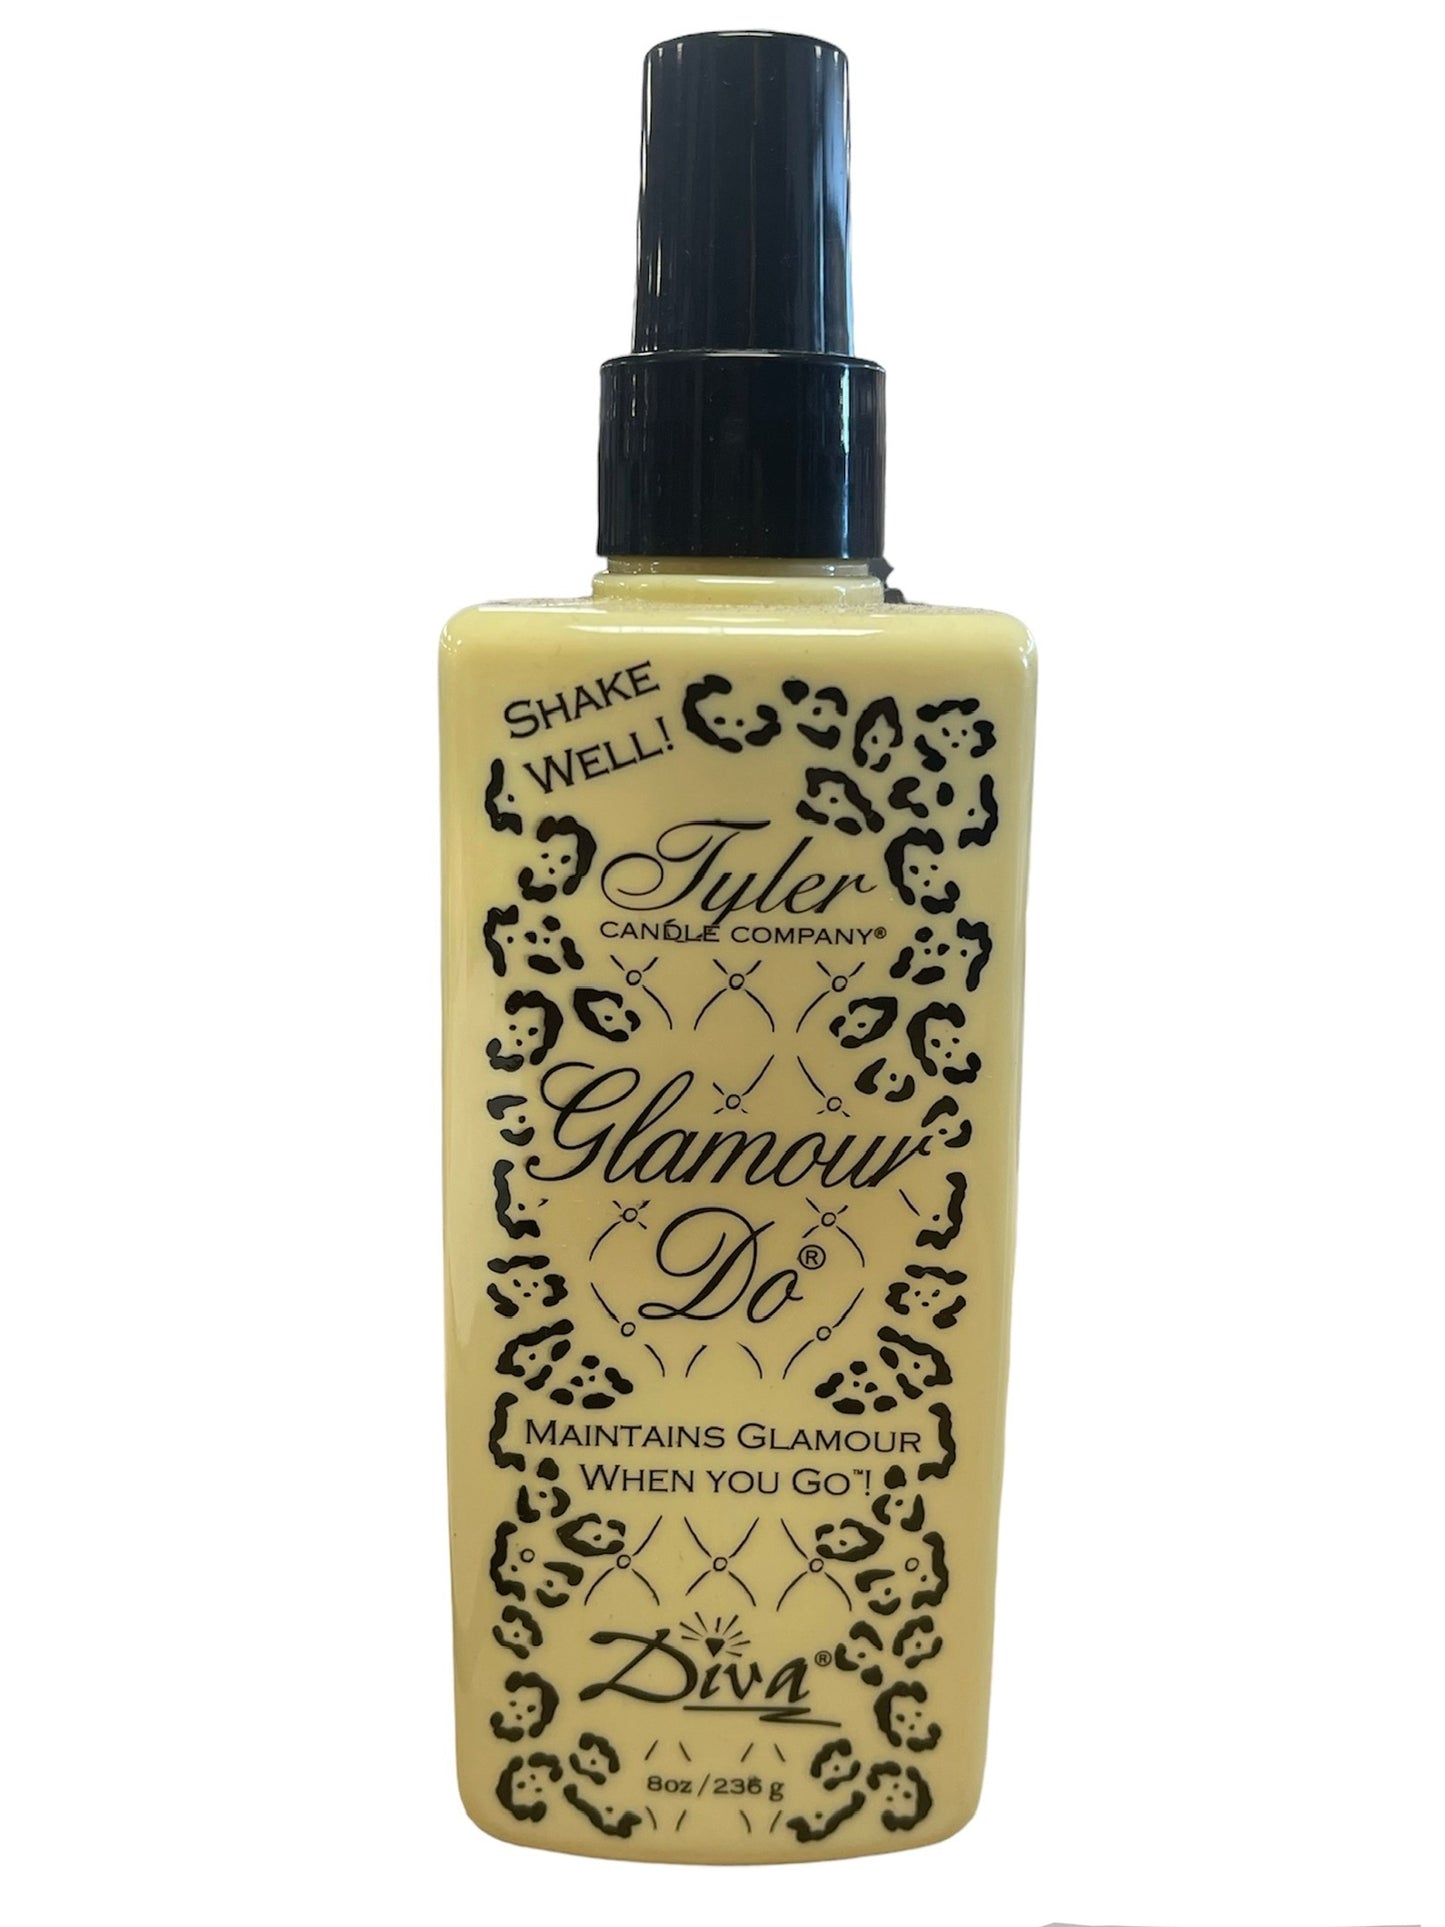 Tyler Candle: Glamour Do